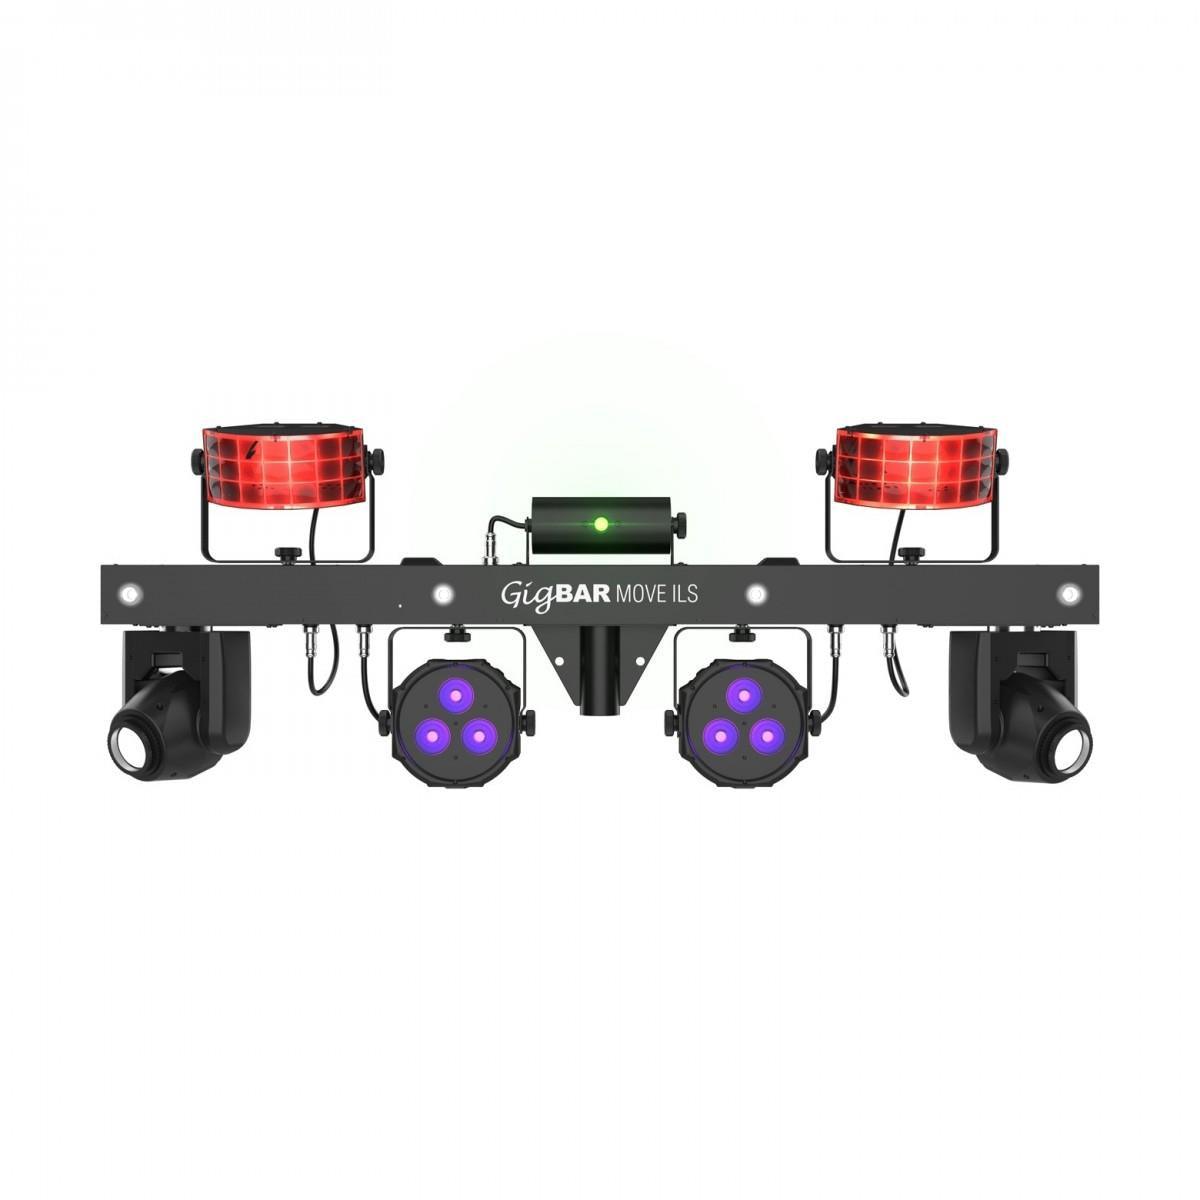 Chauvet GigBAR Move ILS With 2 x Intimidator Spot 160 ILS and 2 X Slimpar H6 and ILS Command Bundle - DY Pro Audio